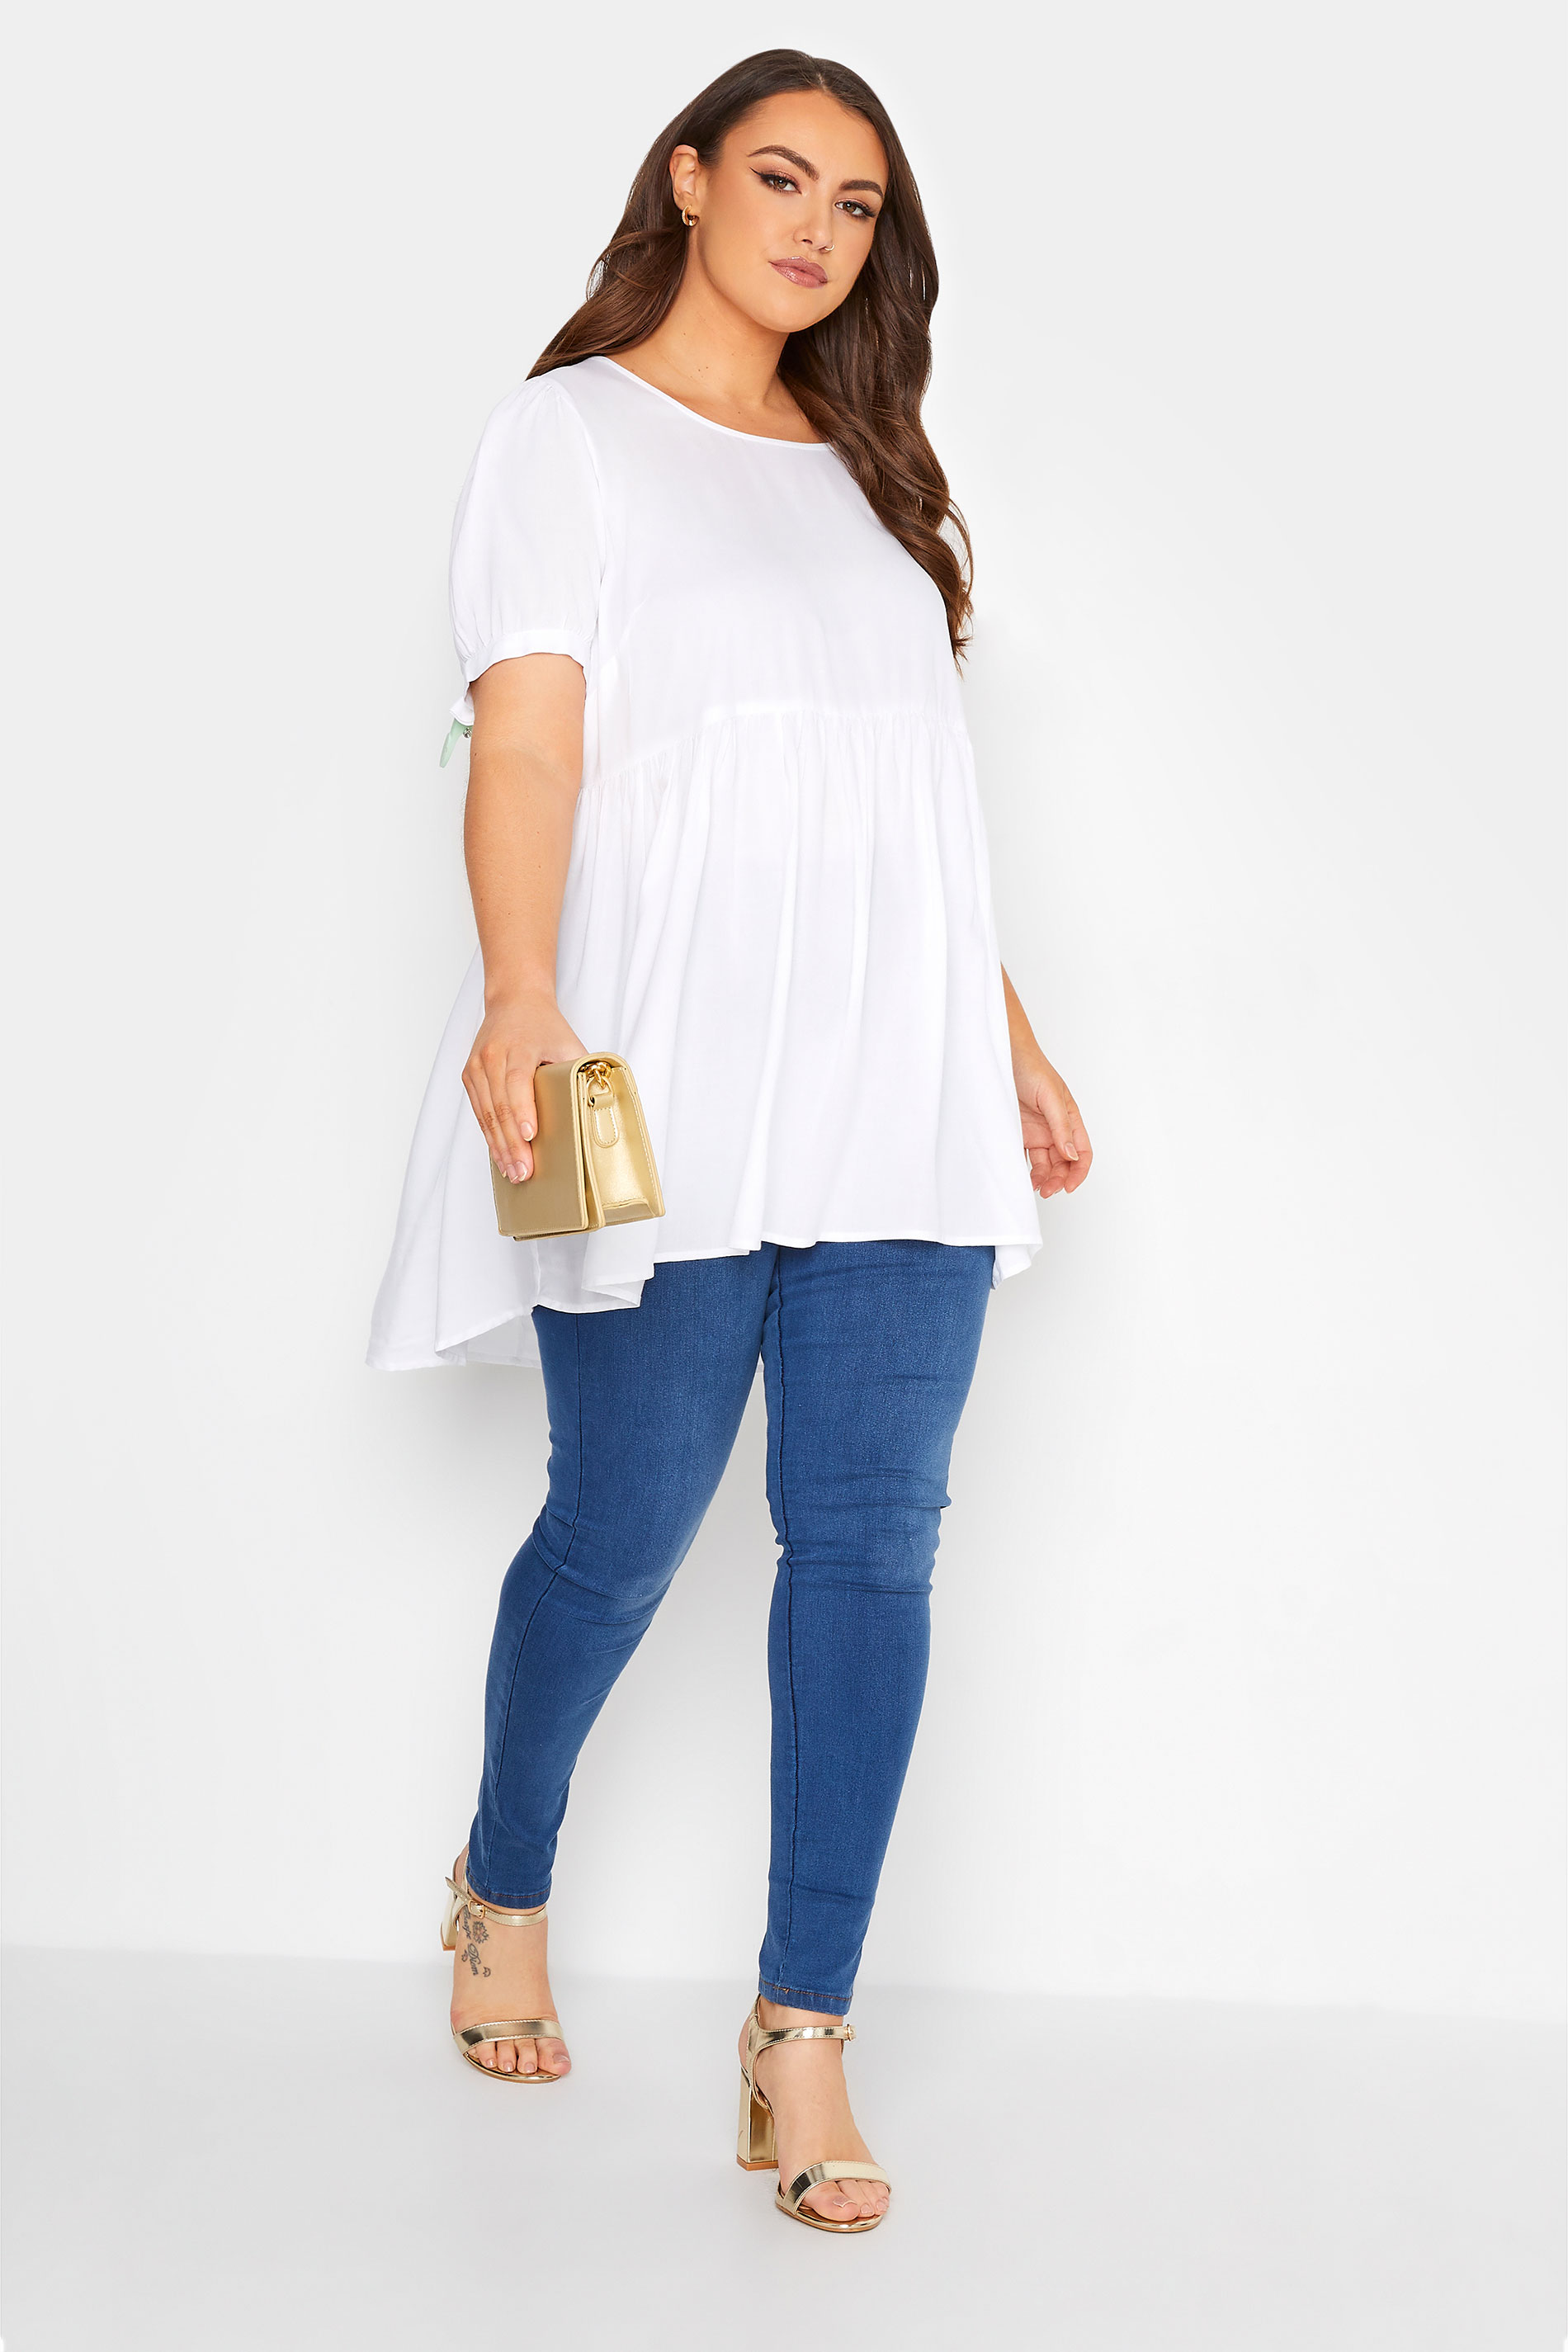 Grande taille  Tops Grande taille  Tops Casual | Top Blanc Smocké Manches Courtes Bouffantes - IN95076